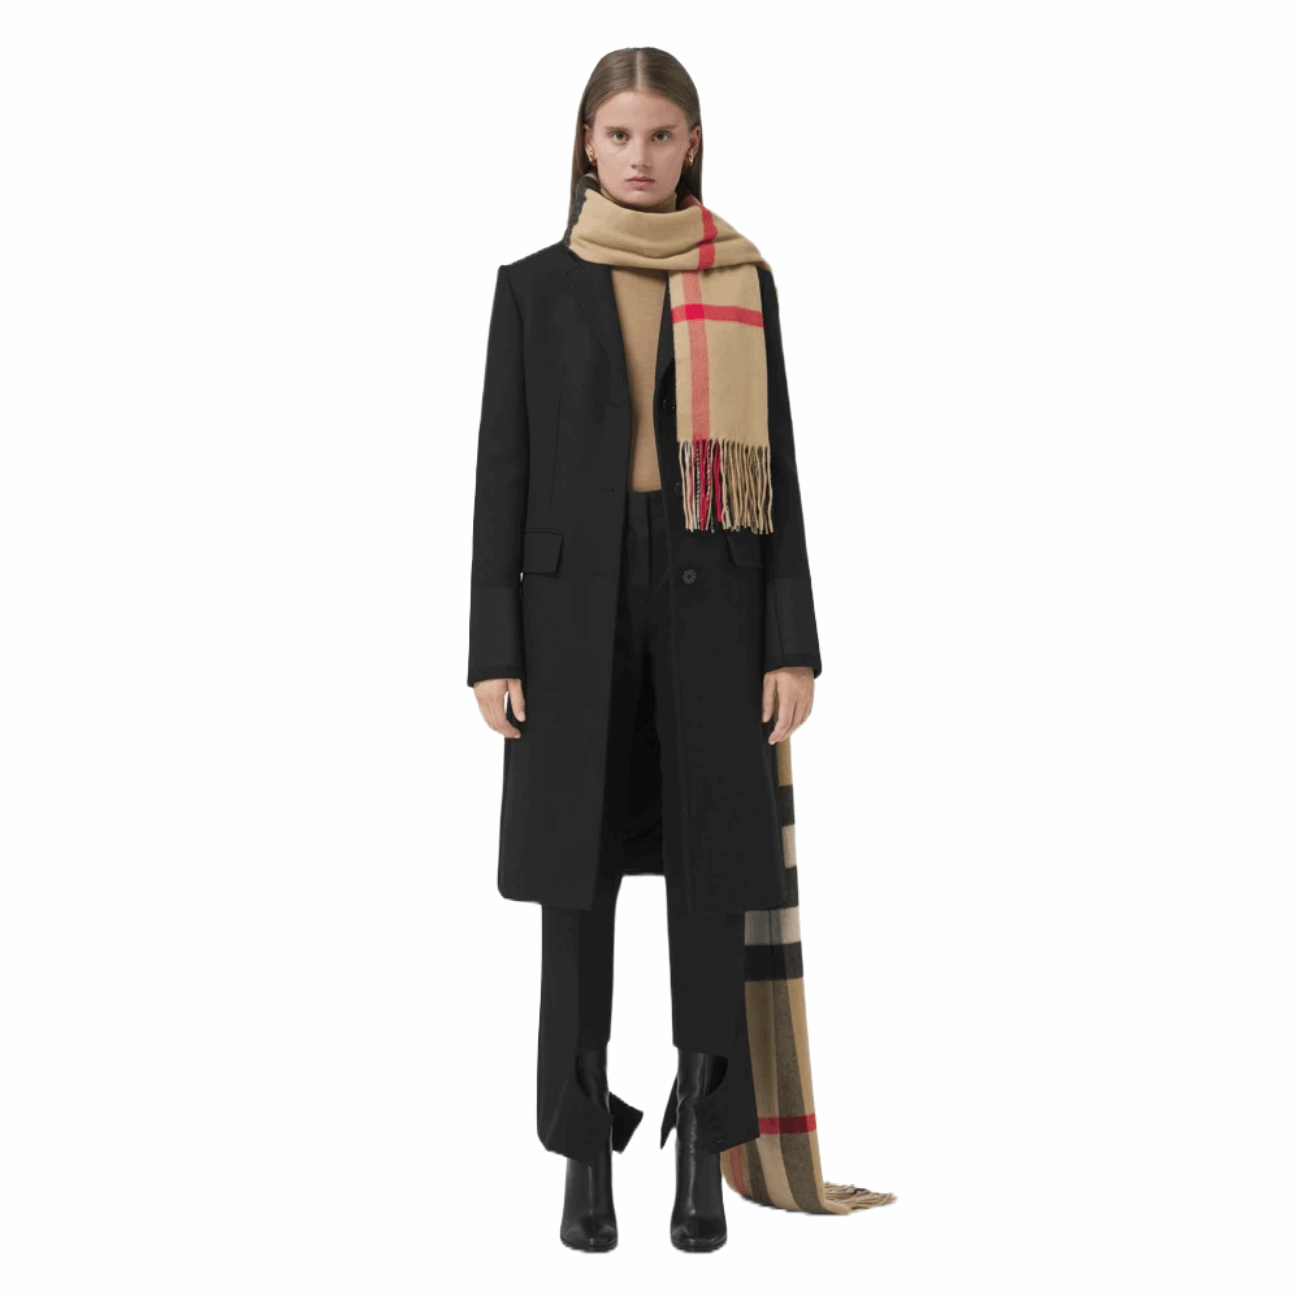 Burberry 80453351 Check Cashmere Oversized Women's Scarf, Archive Beige